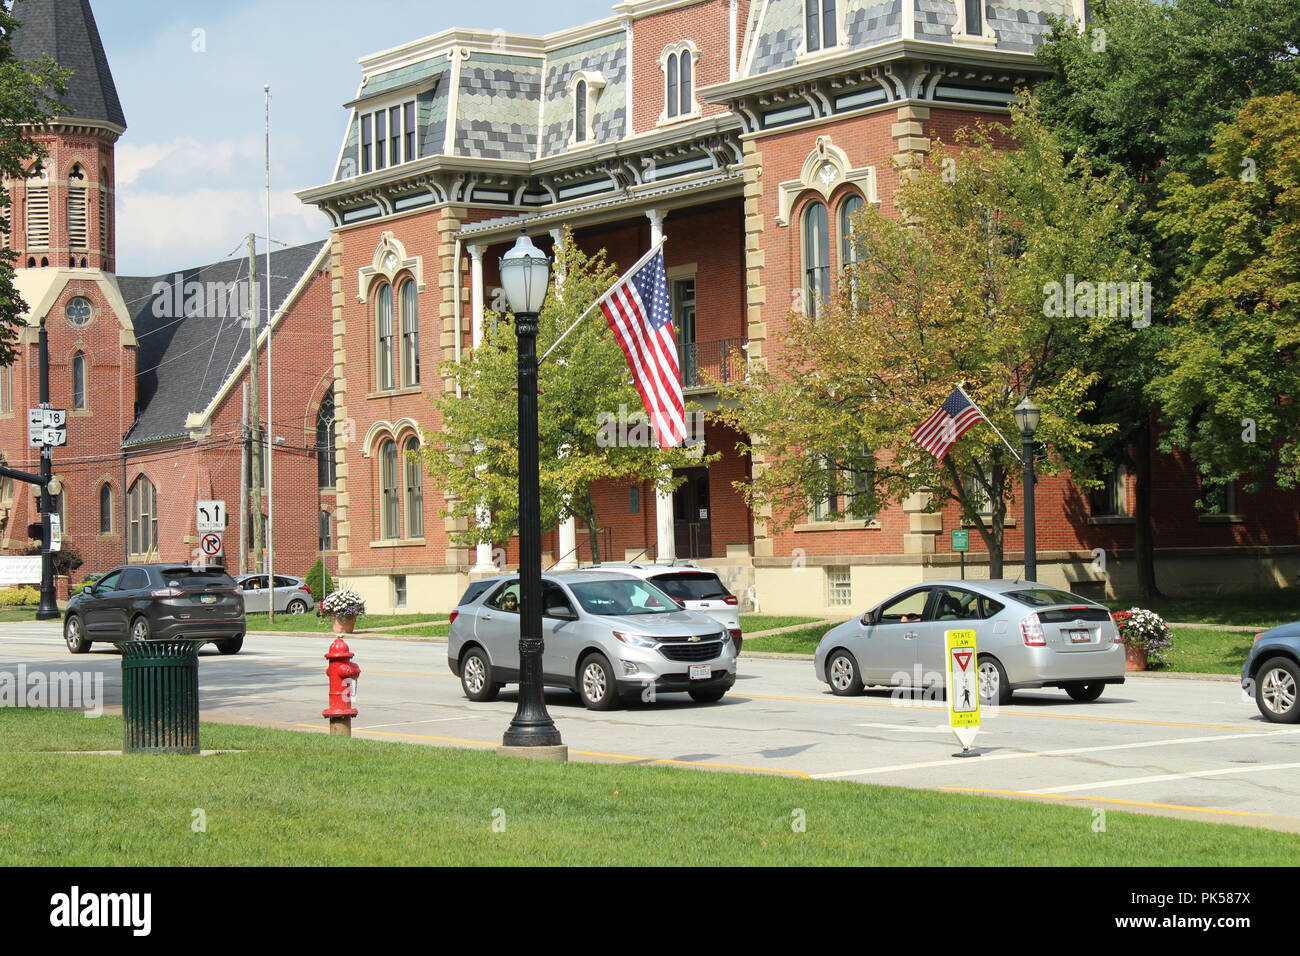 big brick building in a small rural town with traffic on the street with a flag and light pole Stock Photo